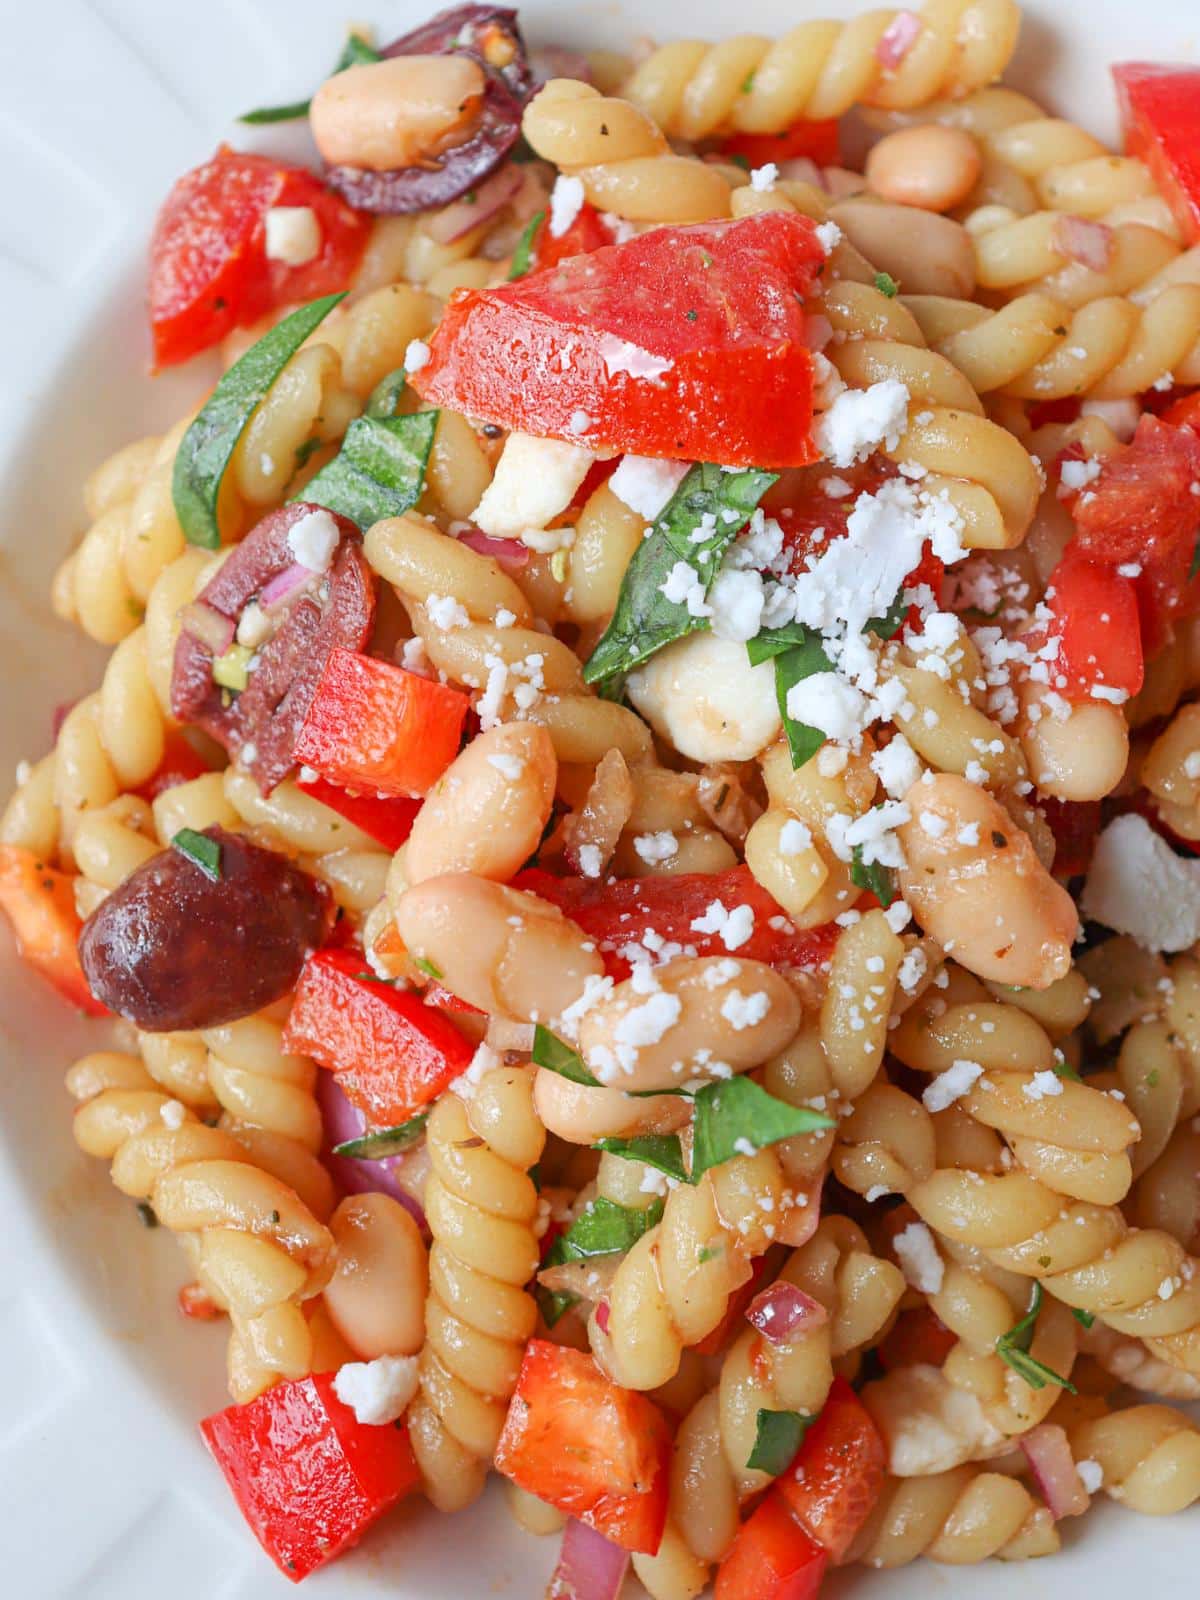 Balsamic pasta salad in a white bowl.